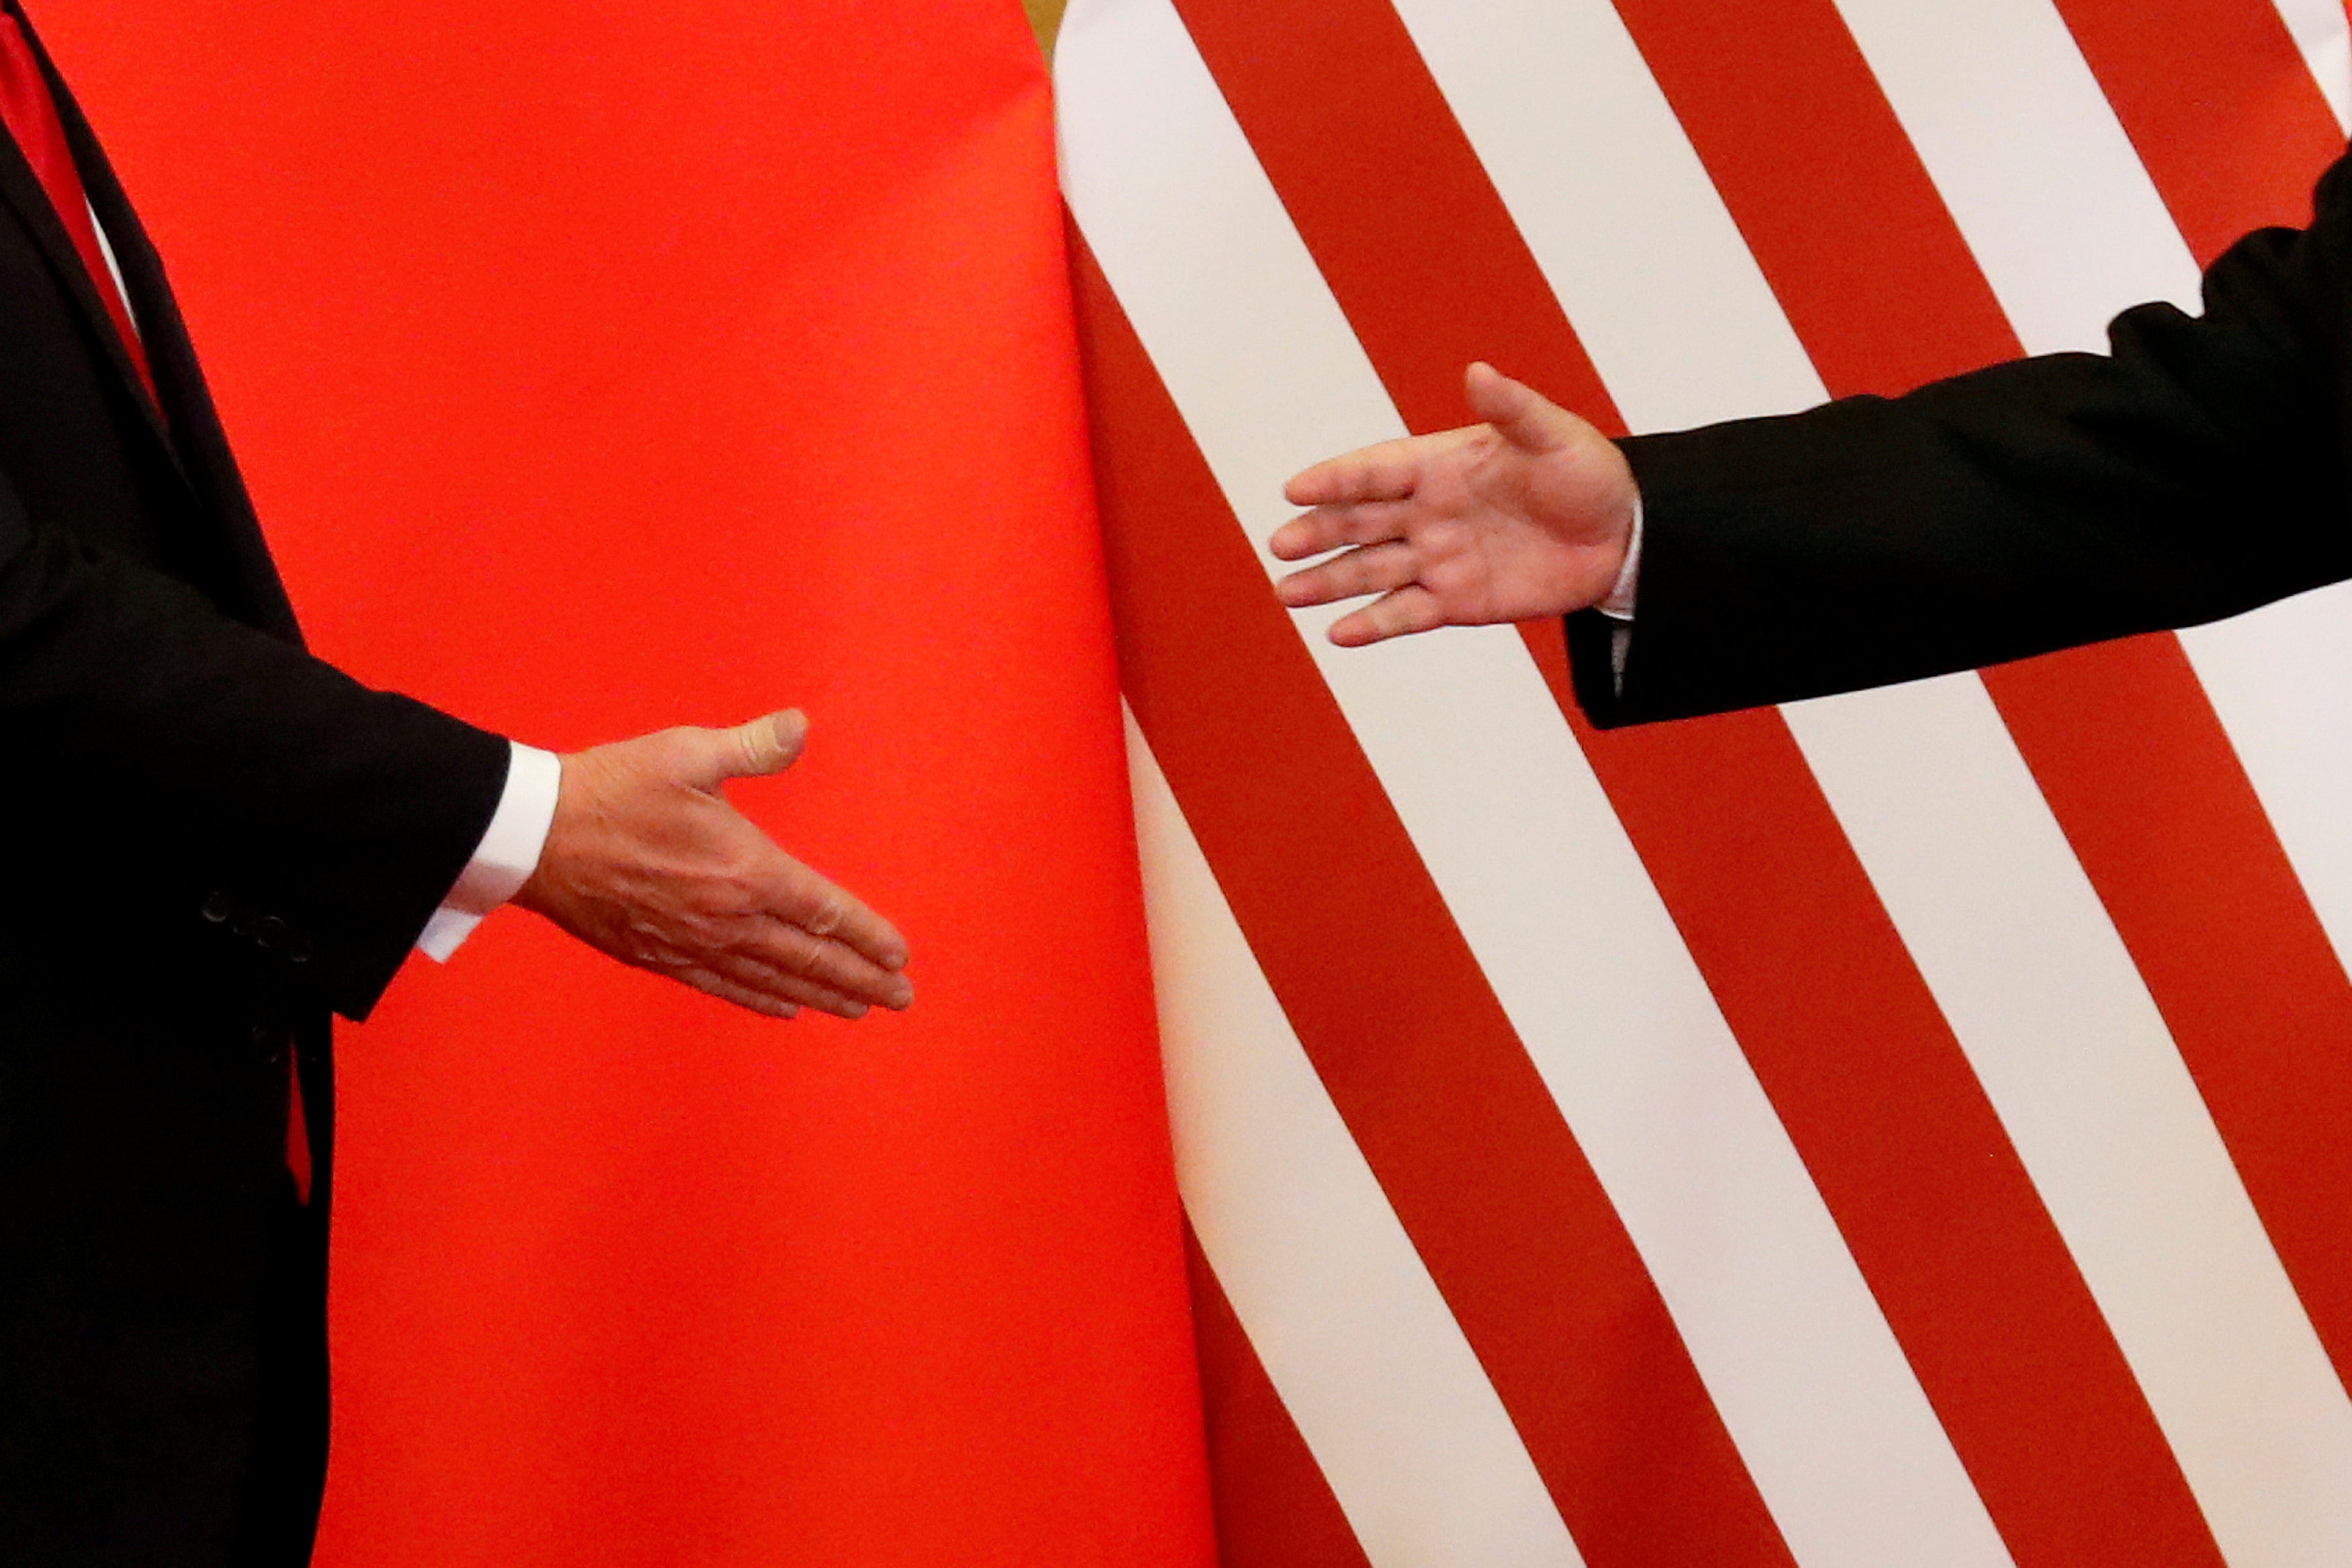 US President Donald Trump and China's President Xi Jinping shake hands after making joint statements at the Great Hall of the People in Beijing, China. (Reuters Photo)